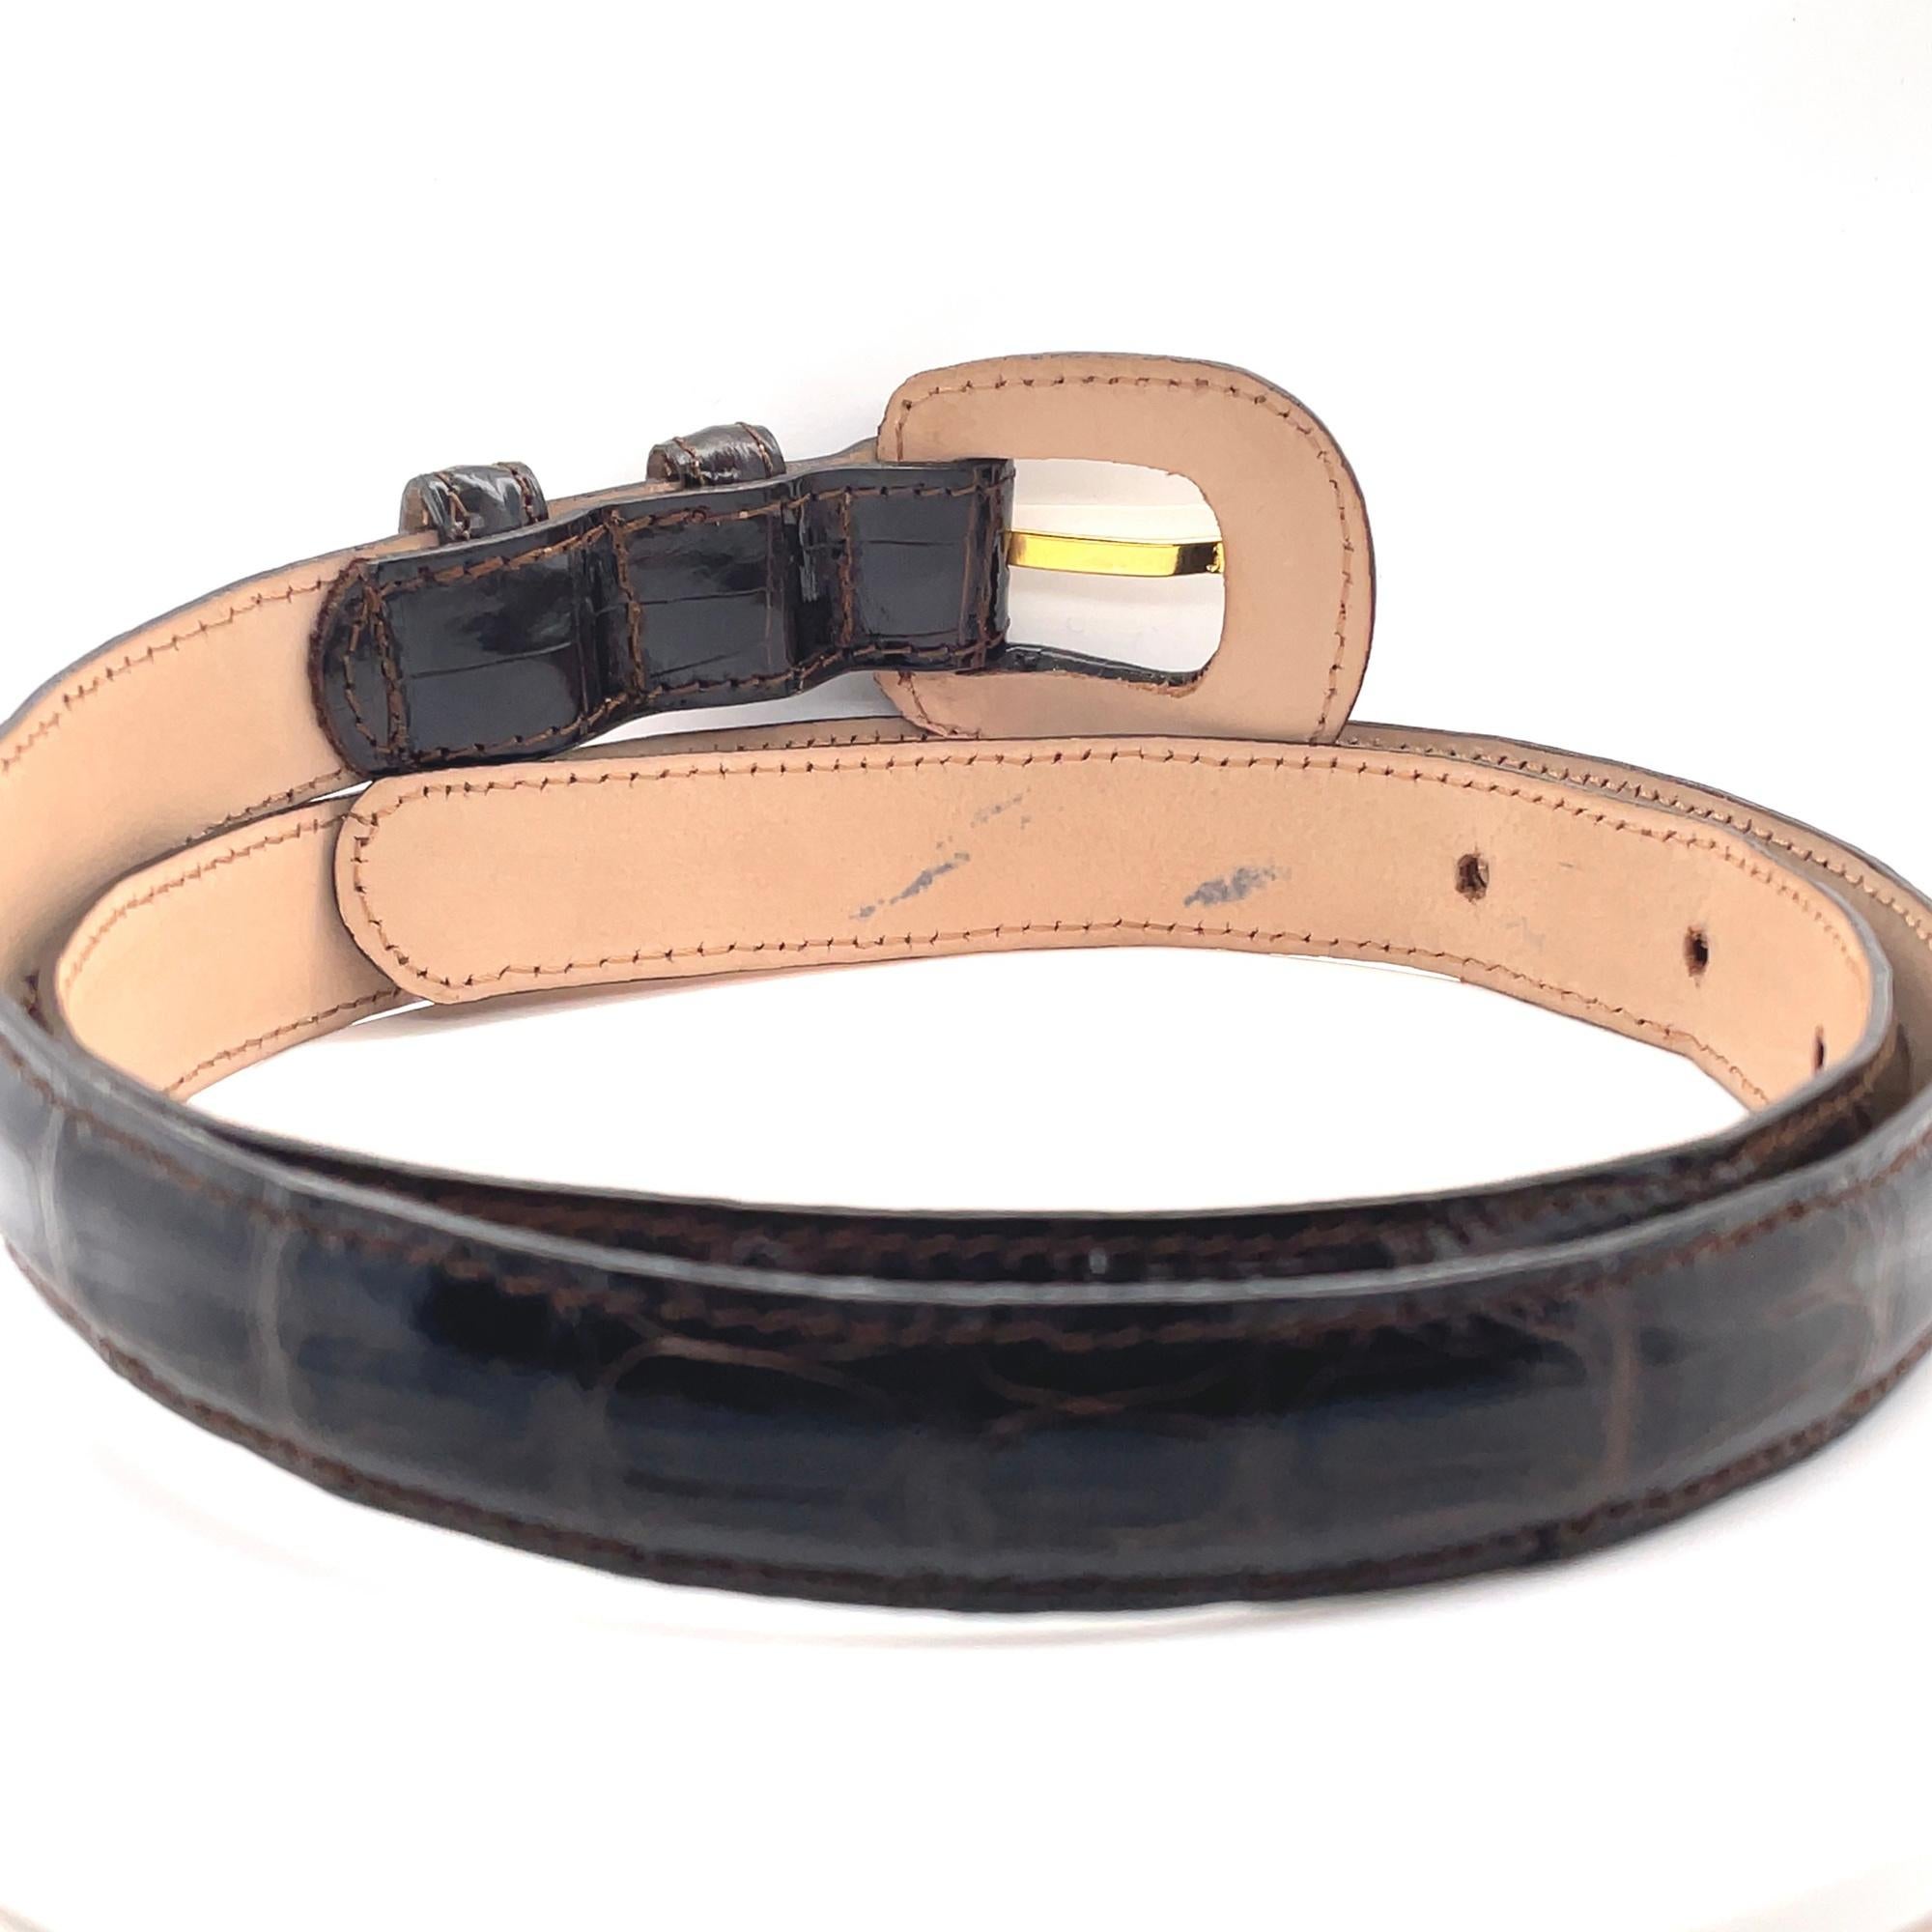 This belt by Reptile's House Italy features a genuine leather pin buckle with gold tone hardware and shiny dark brown genuine leather belt. Buckle measurements: 1.9 inches x 1.8 inches. The belt back is marked with the brand name, logo and size.